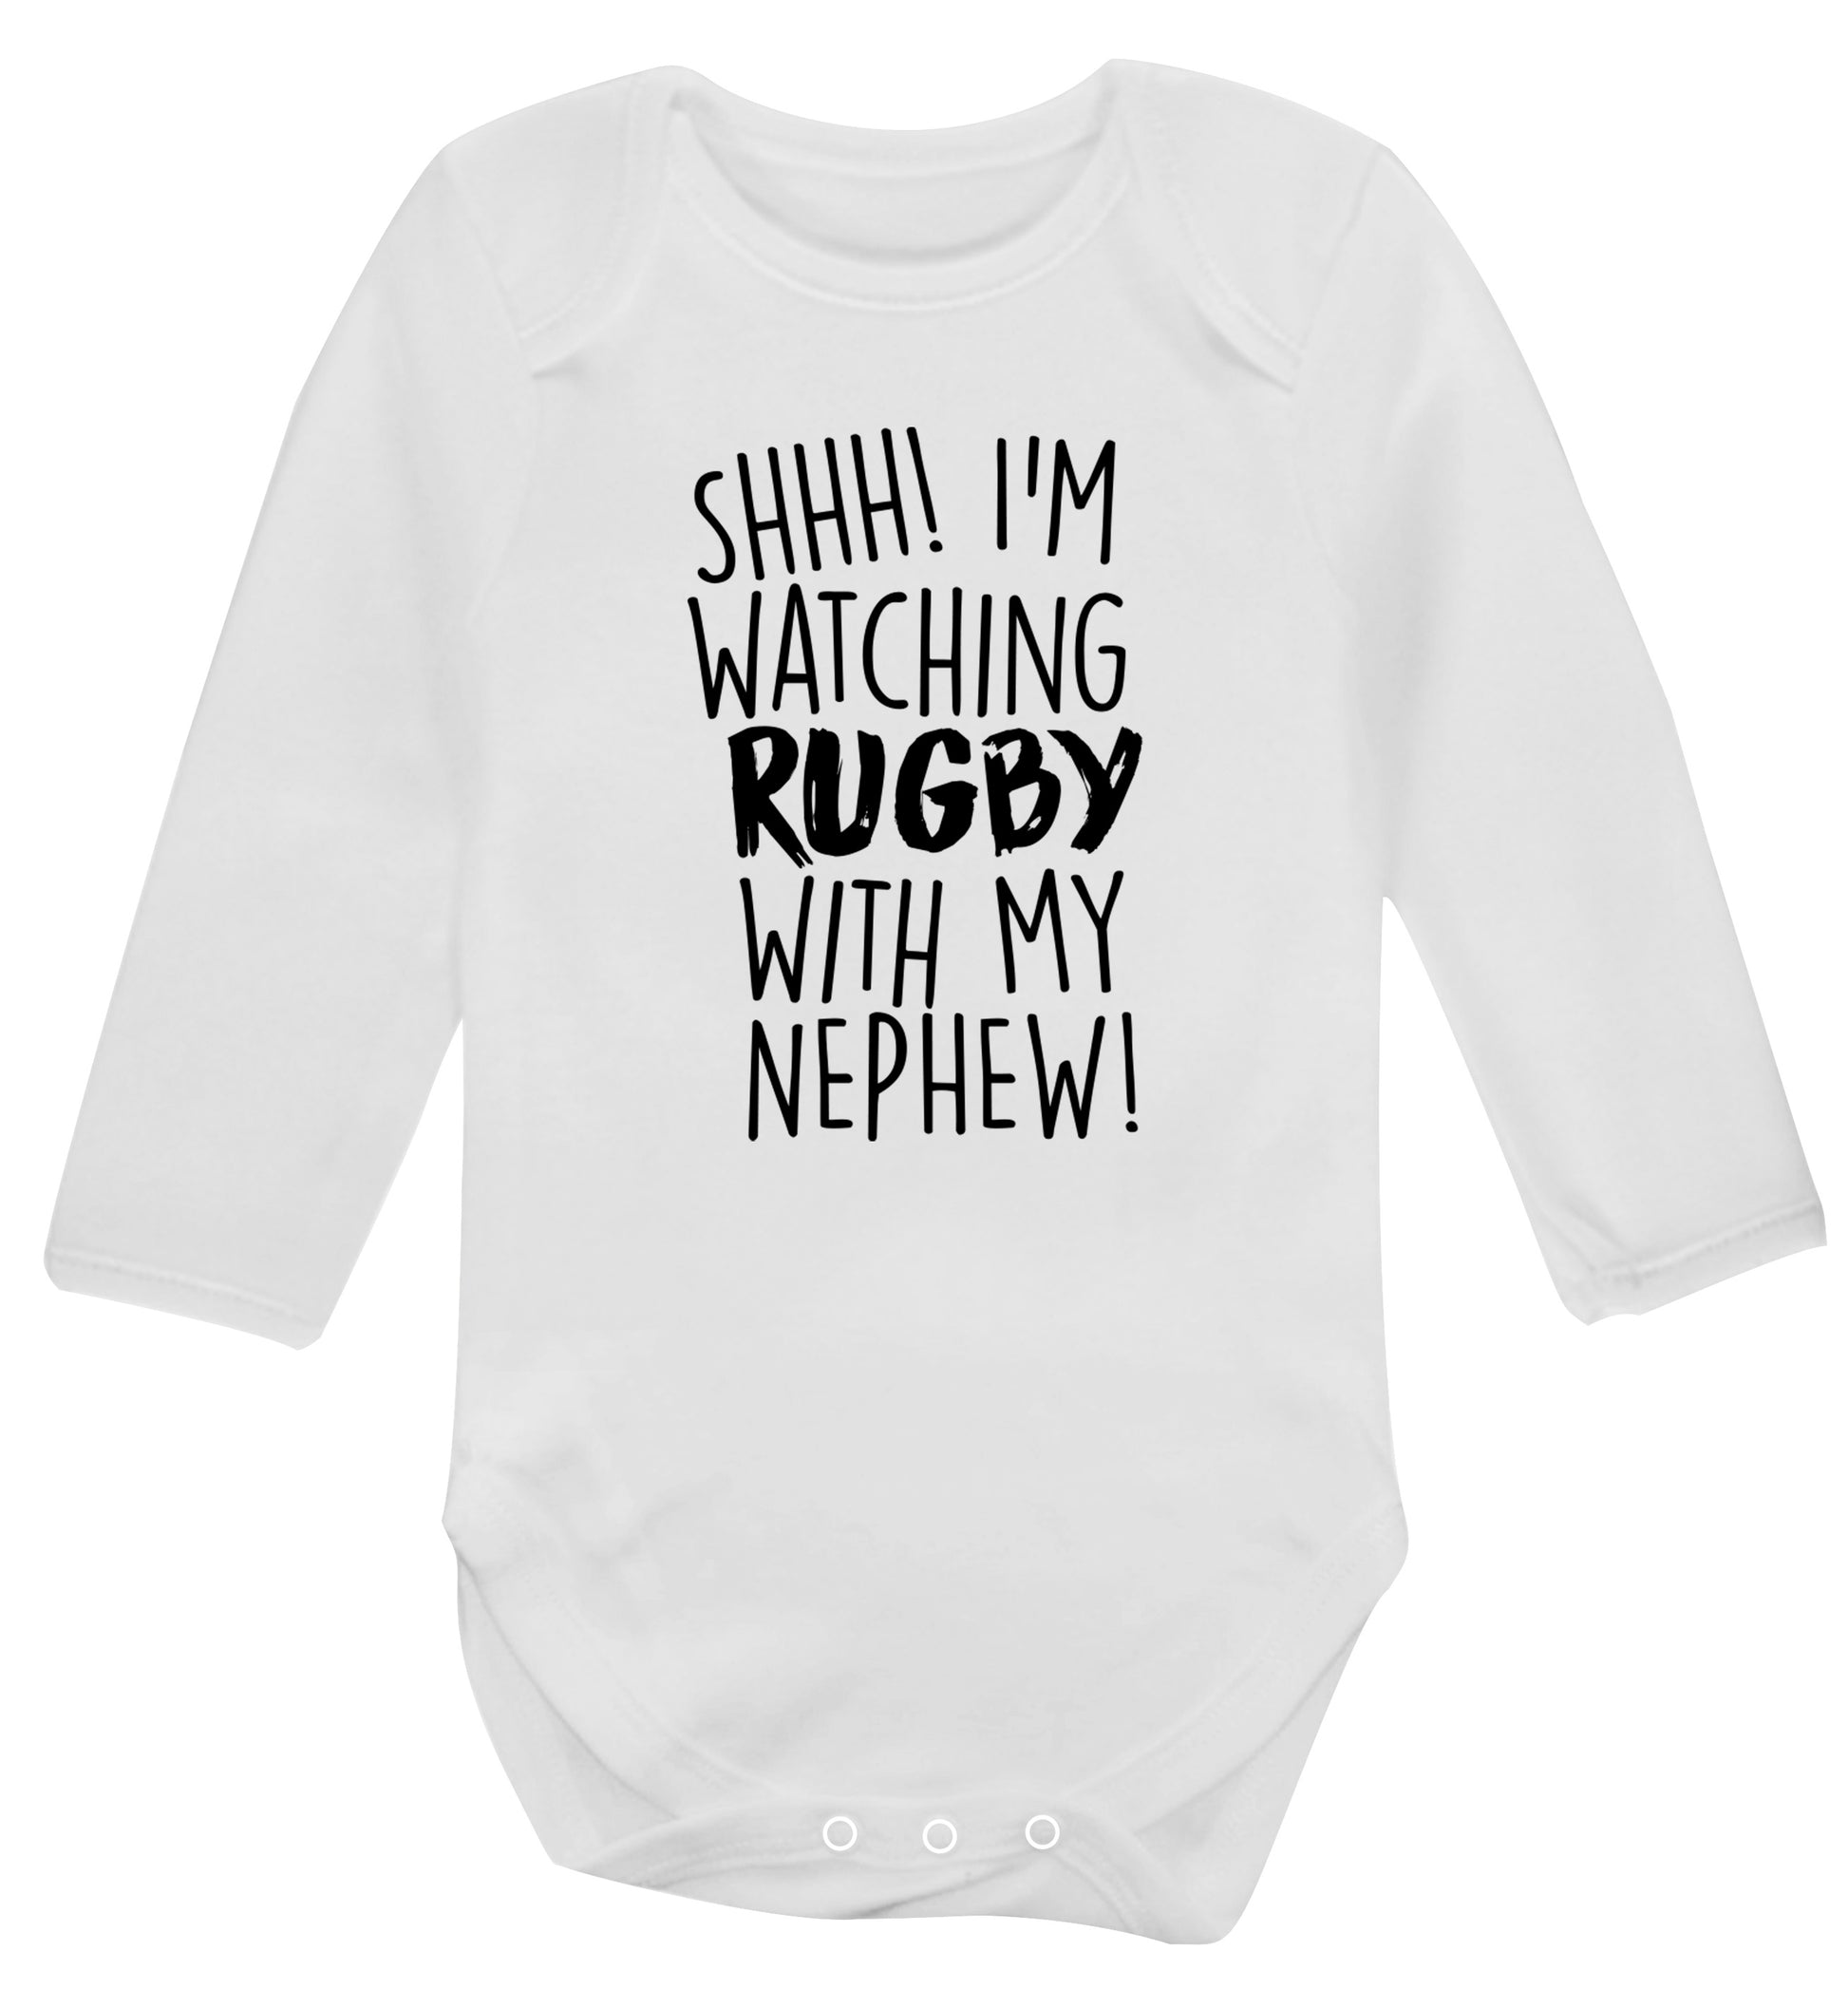 Shh.. I'm watching rugby with my nephew Baby Vest long sleeved white 6-12 months